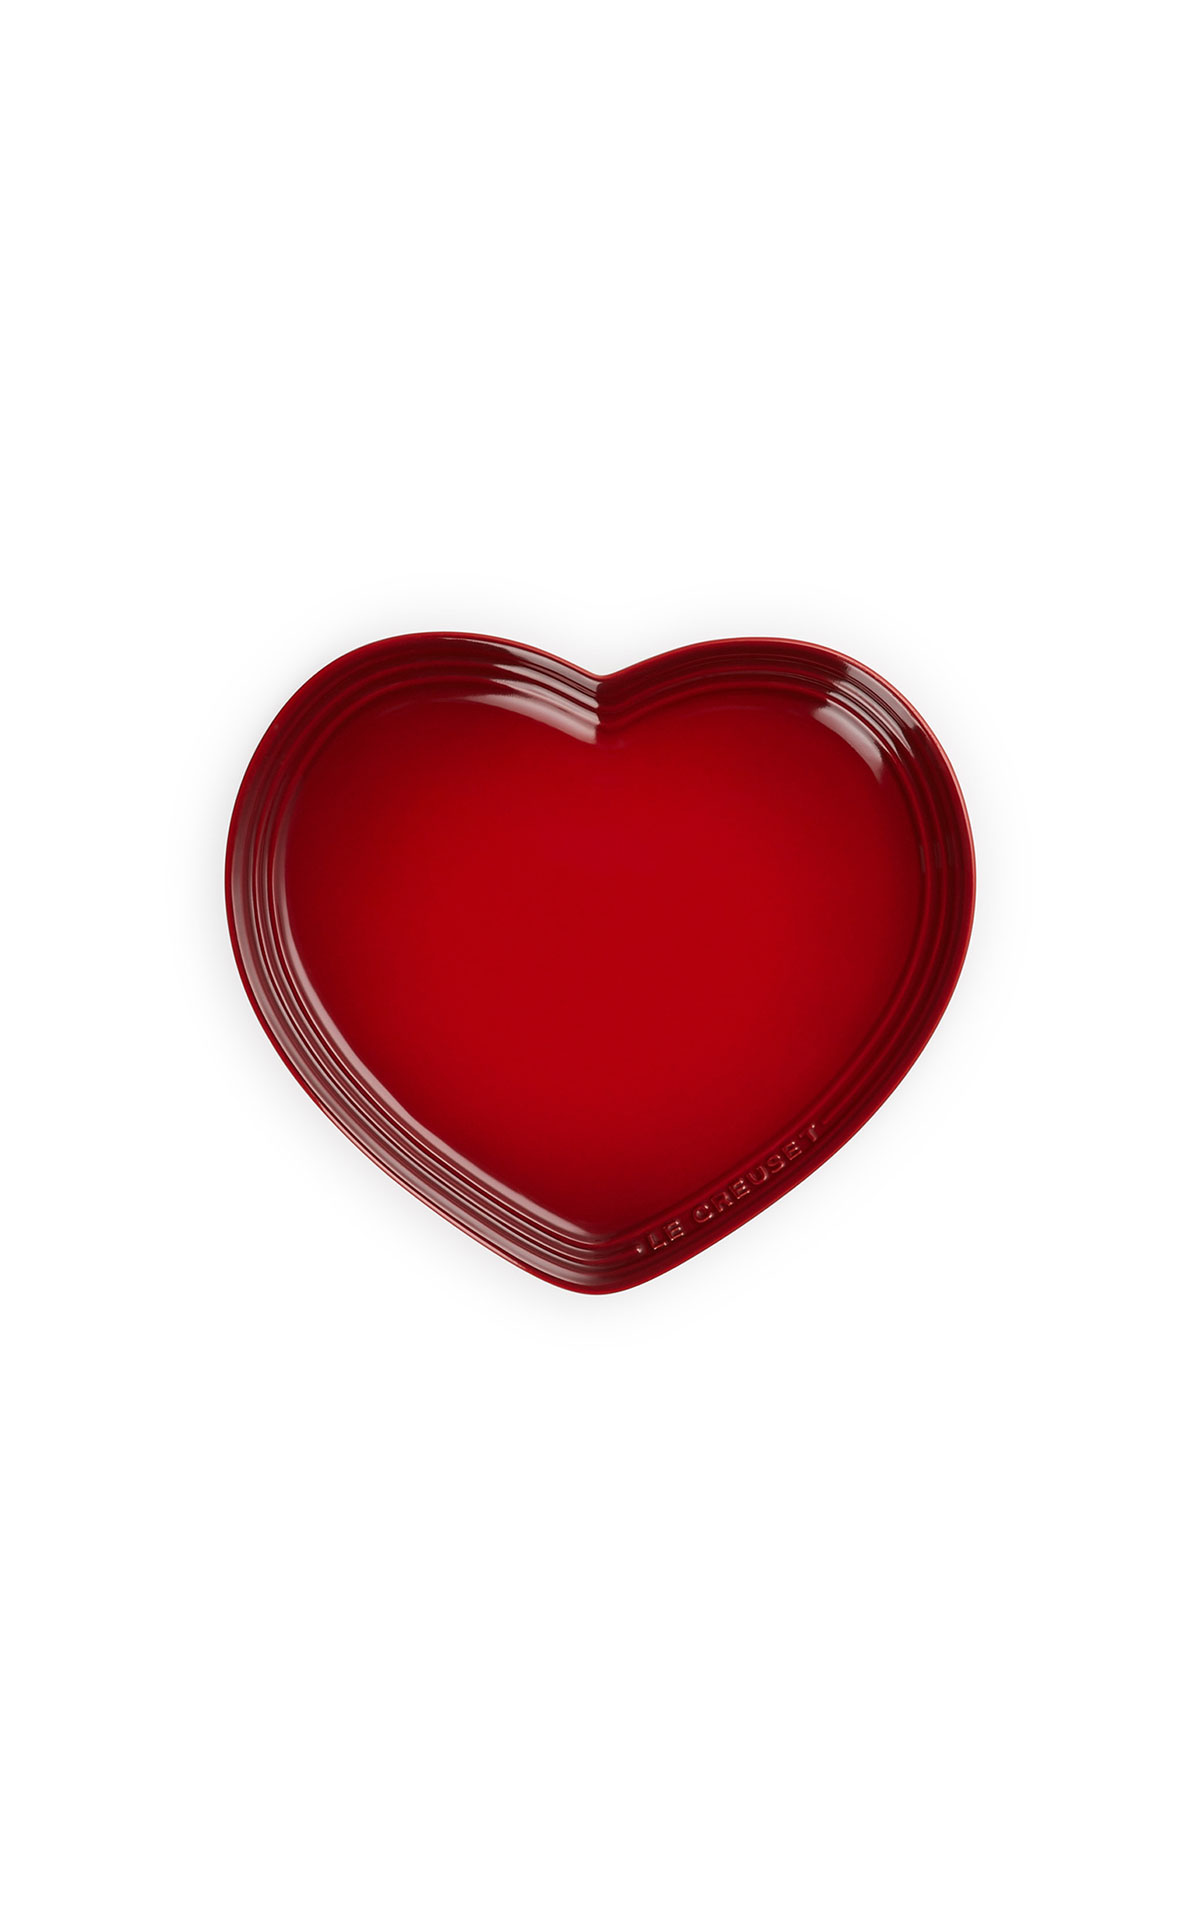 Le Creuset Heart plate cerise from Bicester Village